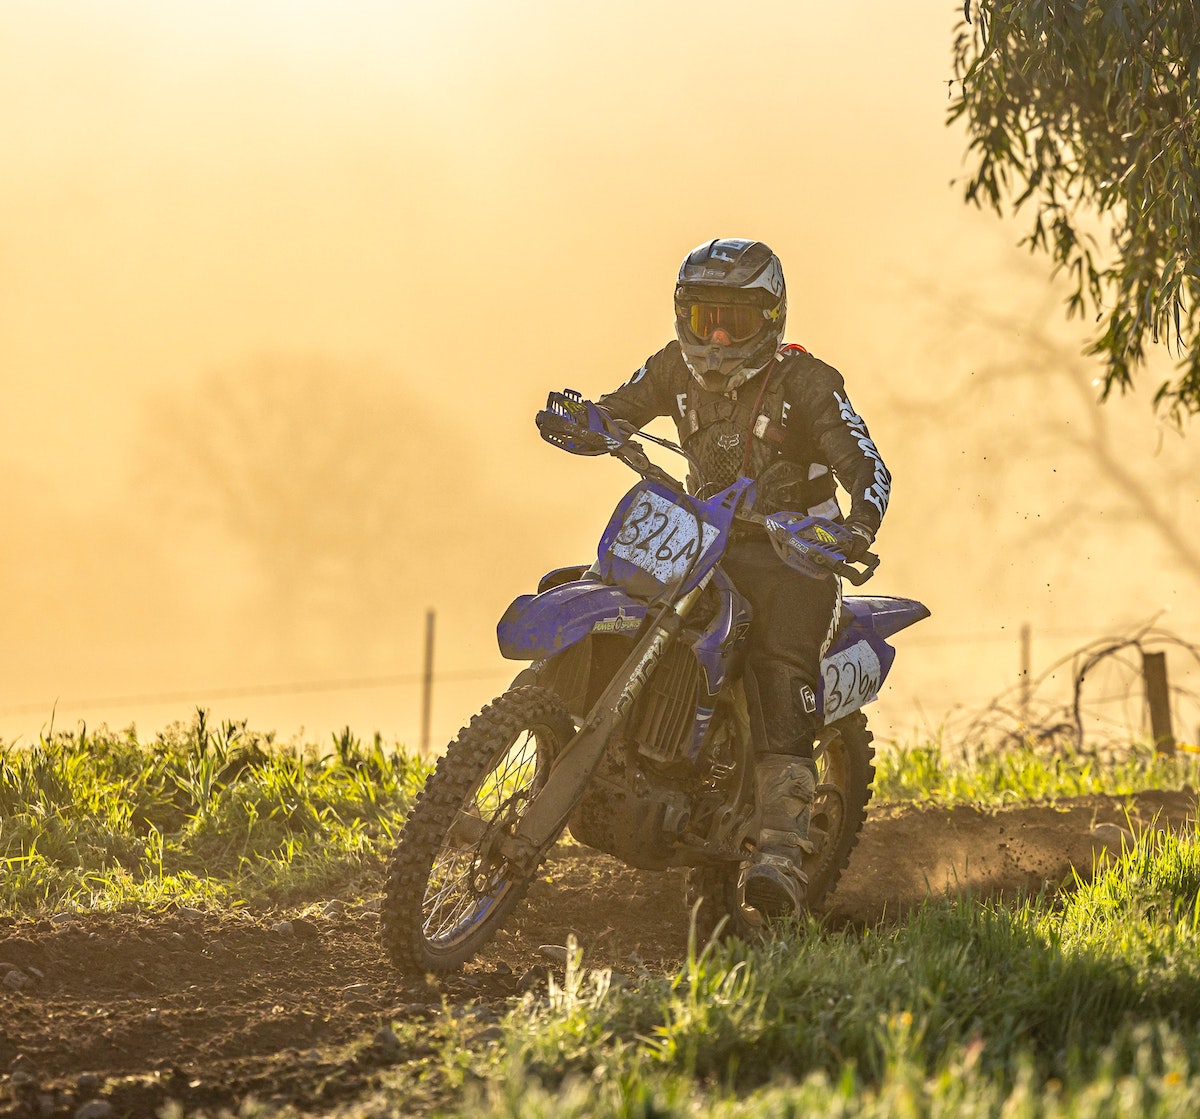 What Are the Best Dirt Bikes for Short Riders?